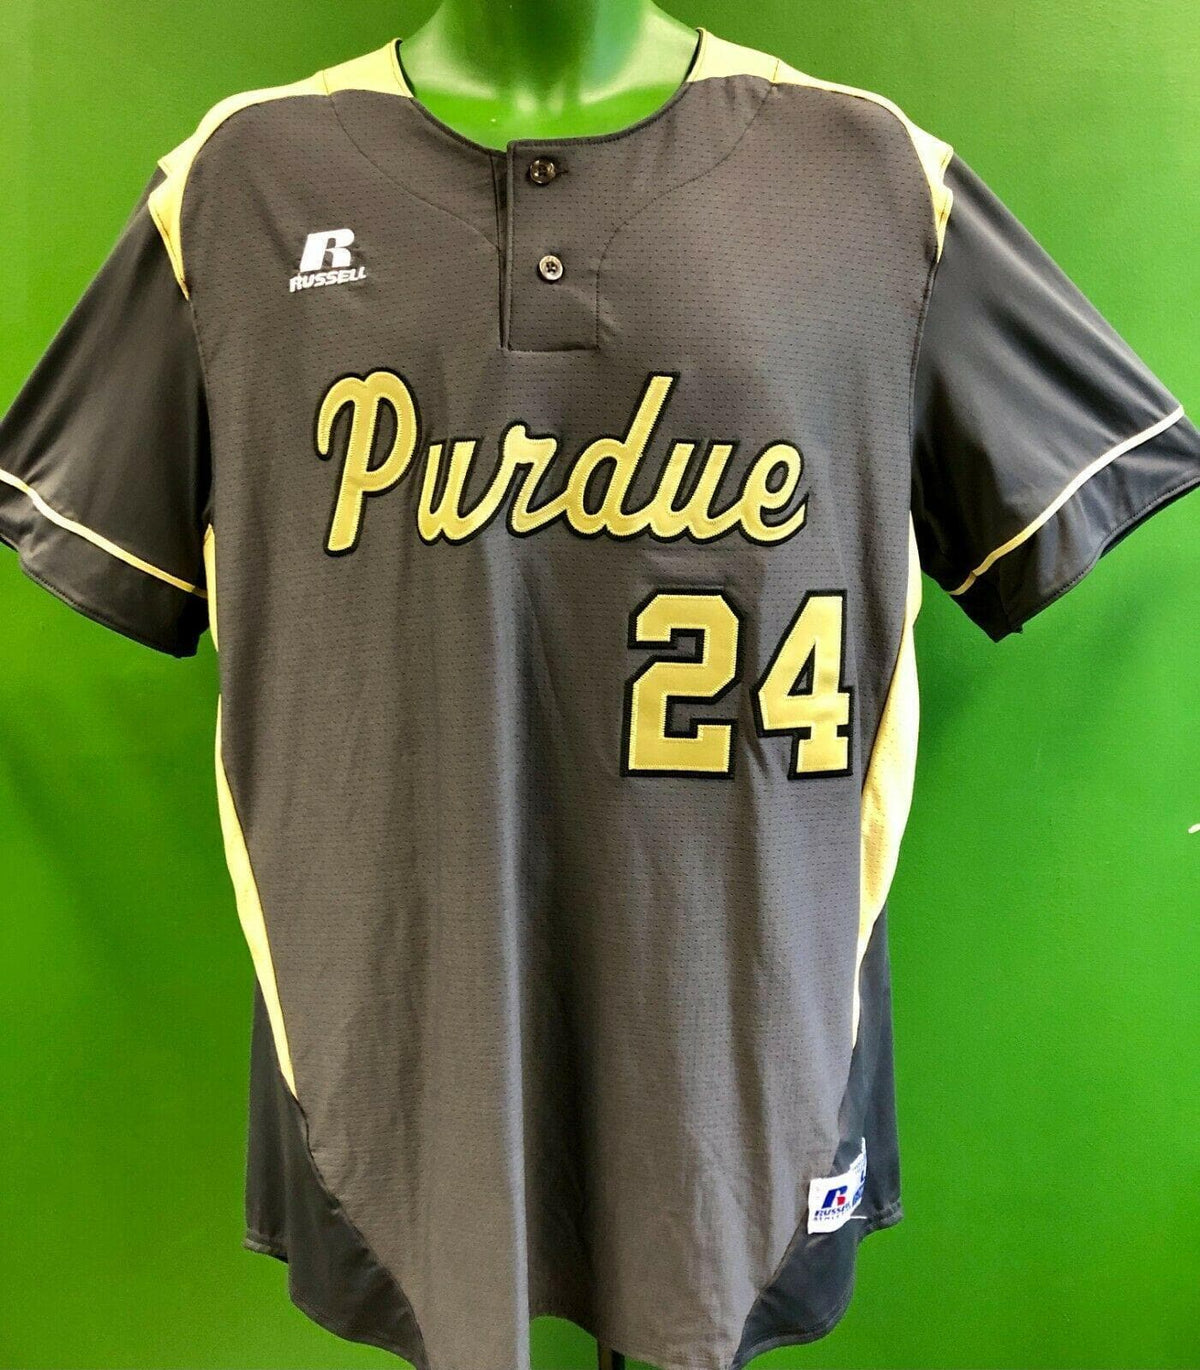 NCAA Purdue Boilermakers Russell Baseball-Style Jersey Men's Large NWT